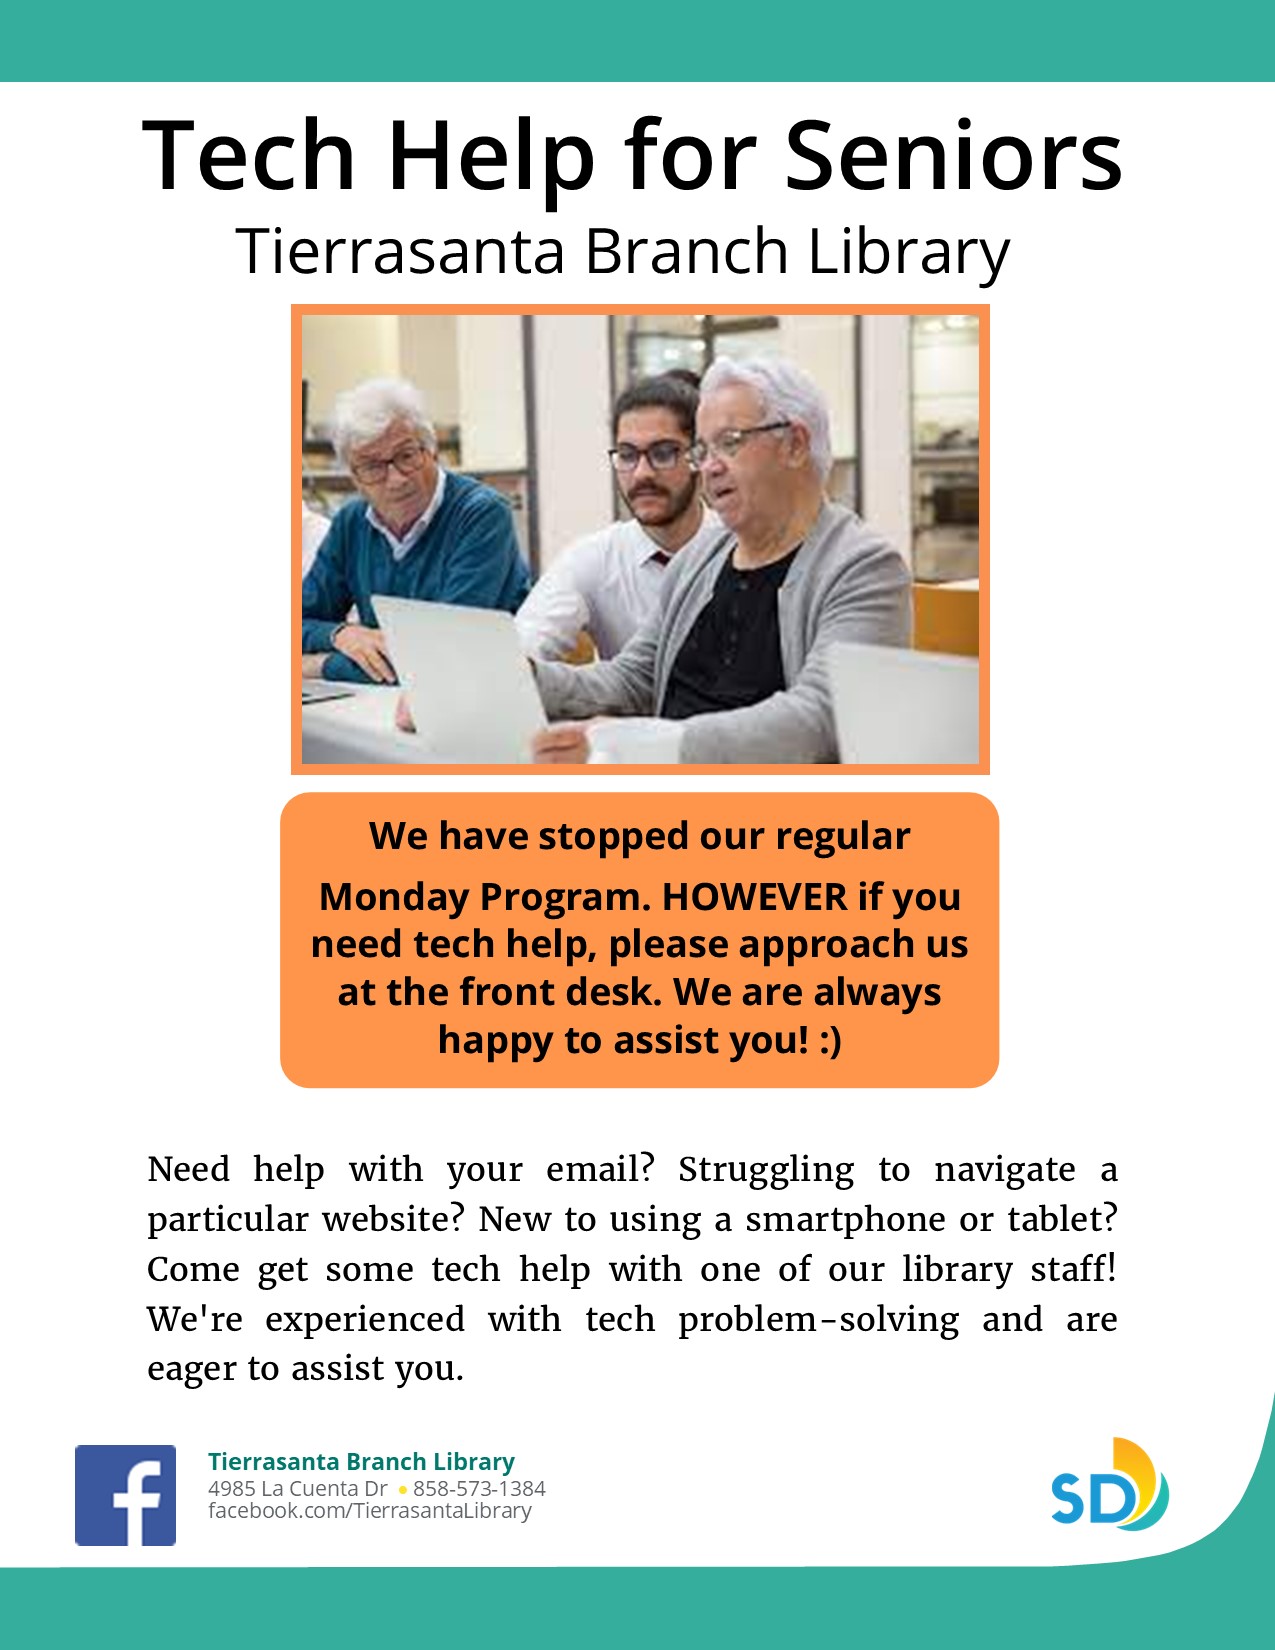 flyer with the image of older gentlemen around a laptop at a table talking